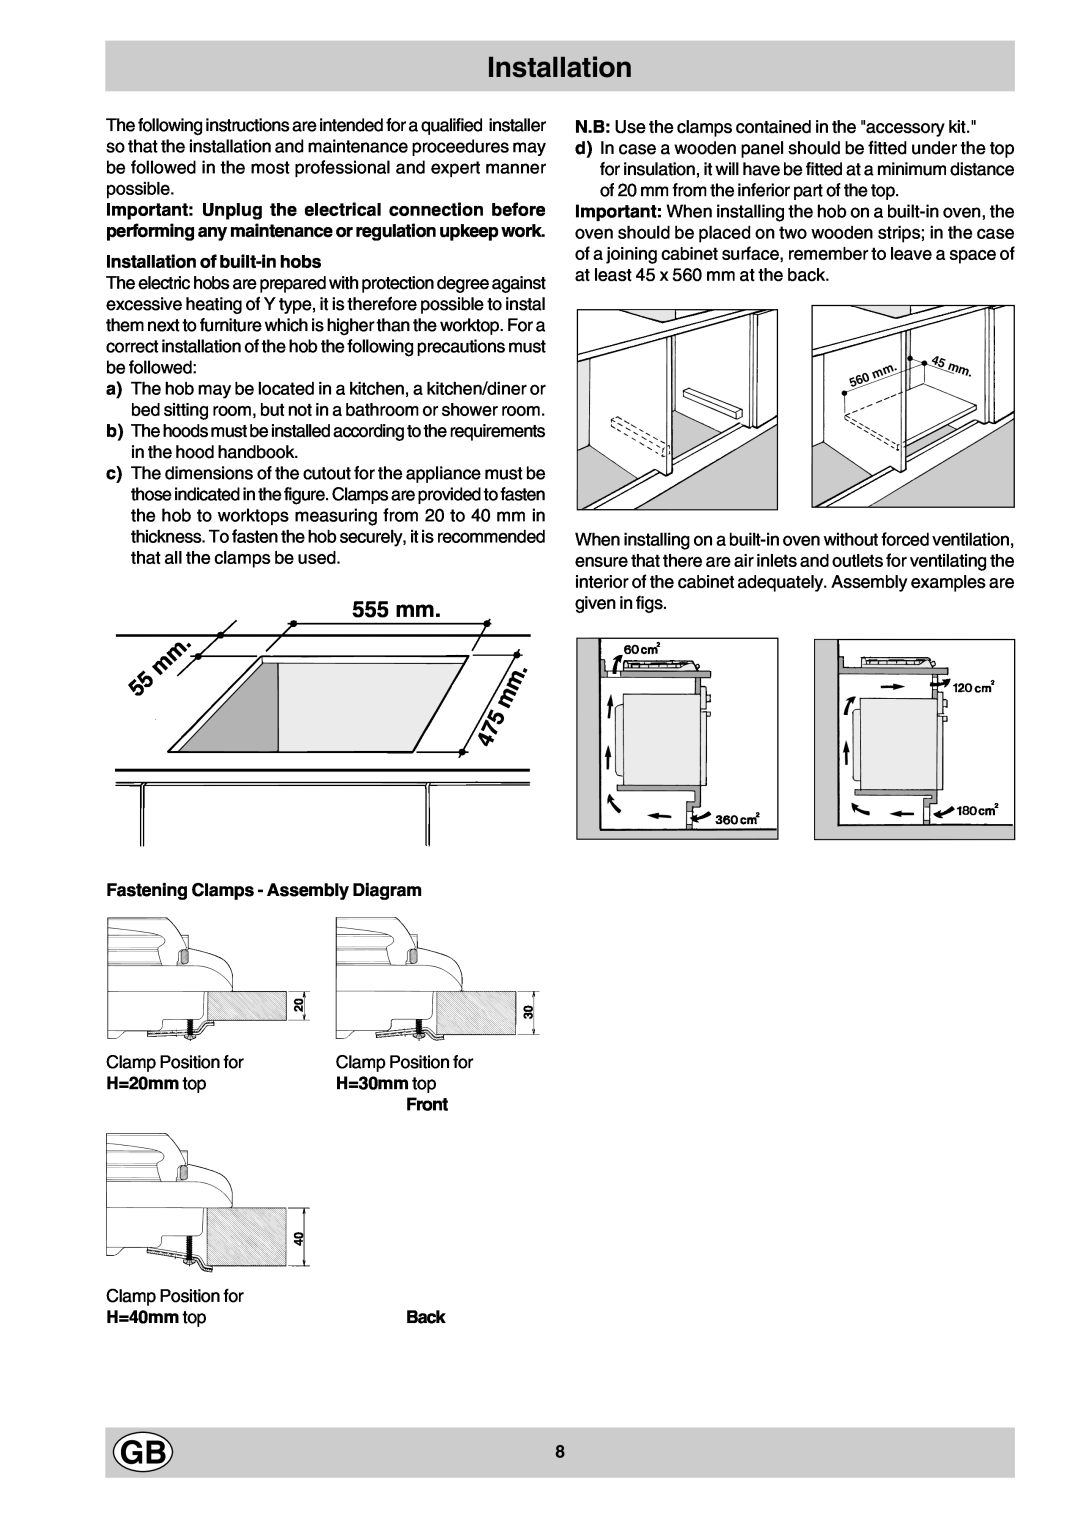 Hotpoint E604 555 mm, Installation of built-in hobs, Fastening Clamps - Assembly Diagram, H=20mm top, H=30mm top, Back 